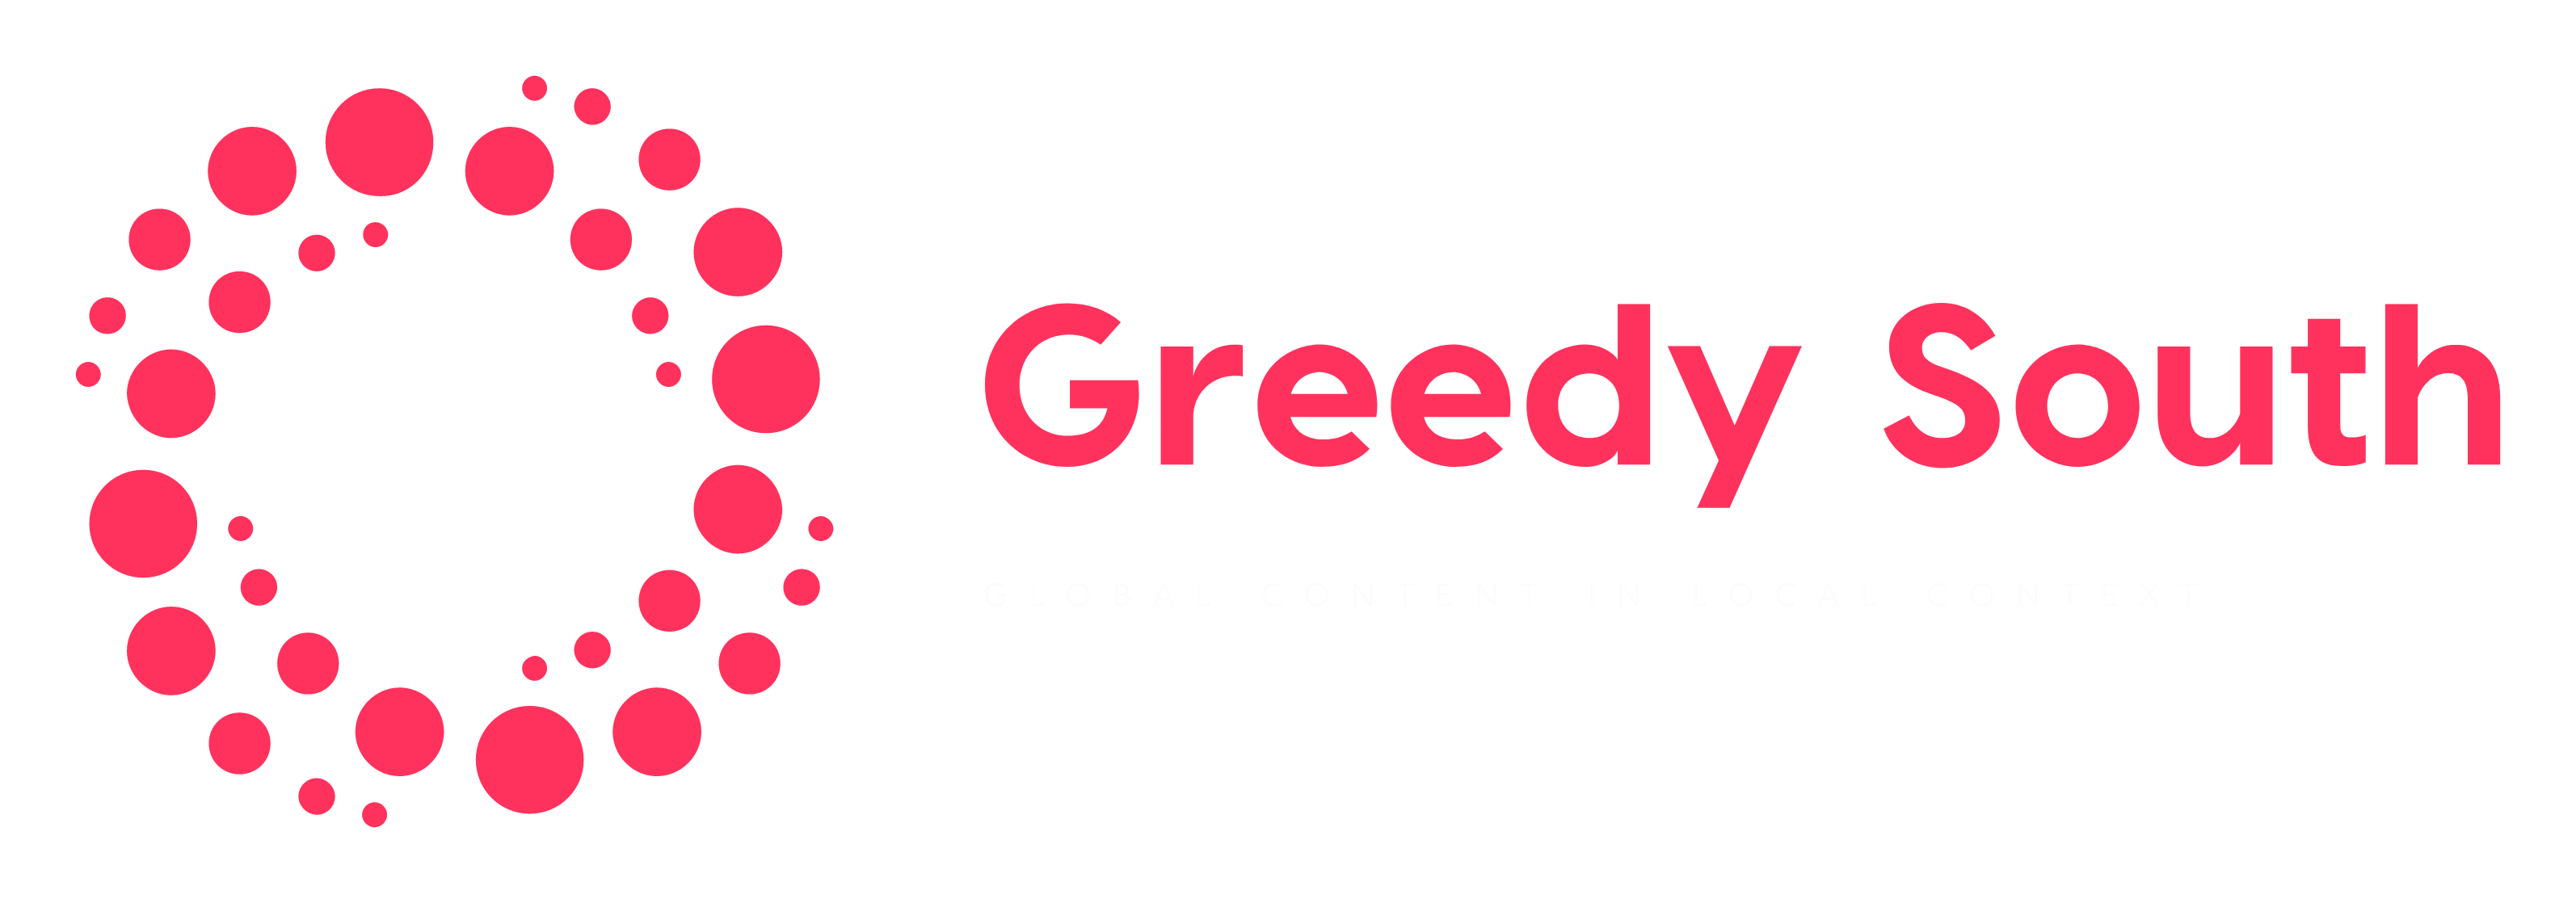 Greedysouth About Us